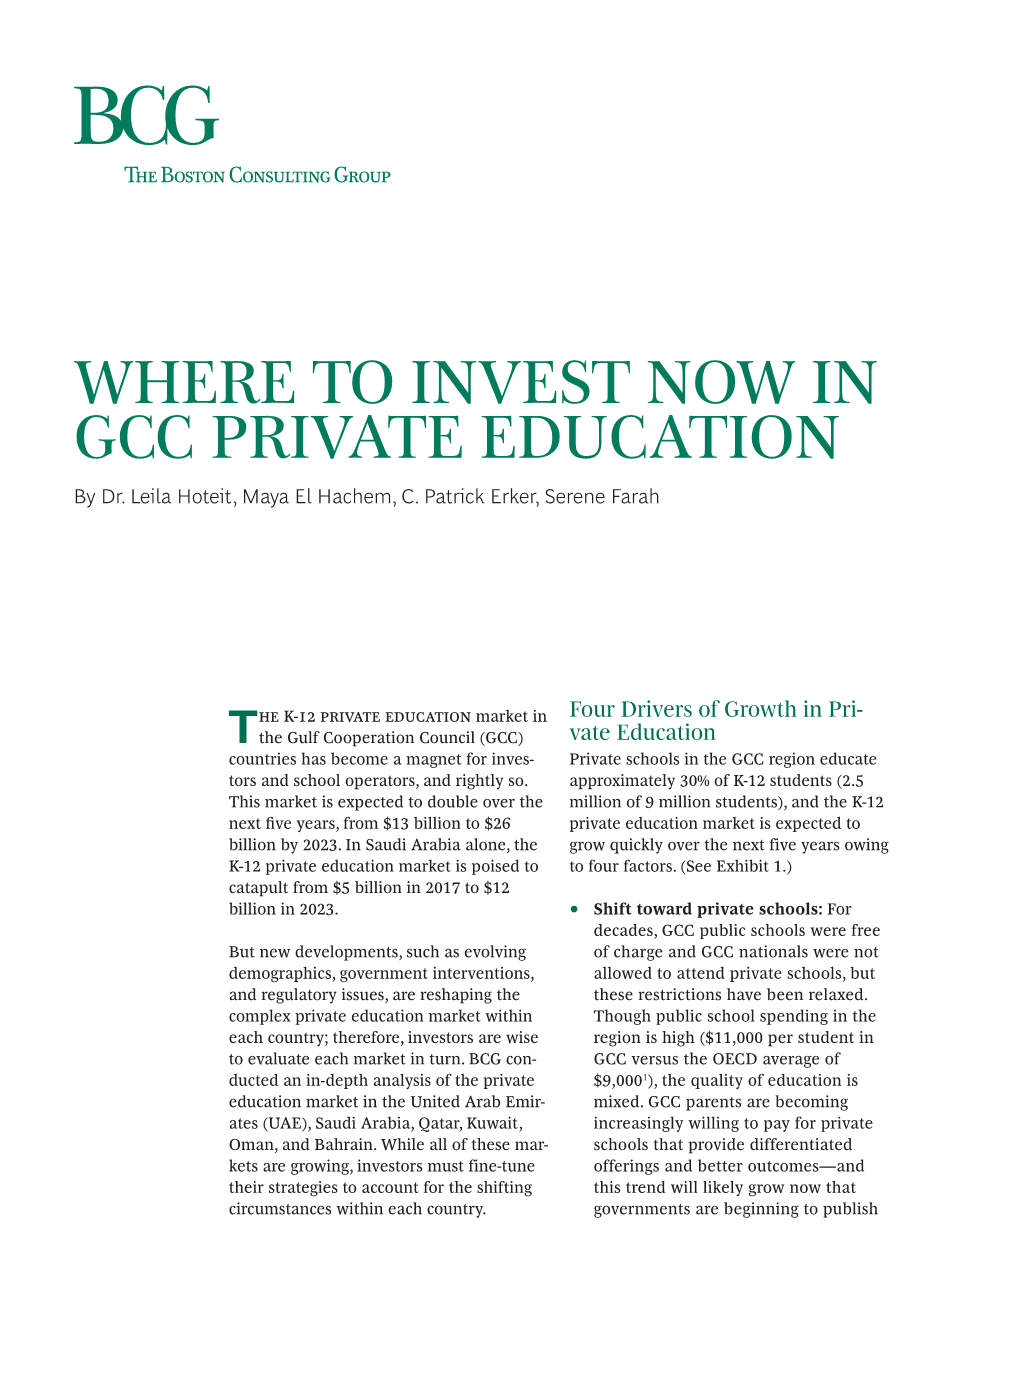 WHERE to INVEST NOW in GCC PRIVATE EDUCATION by Dr